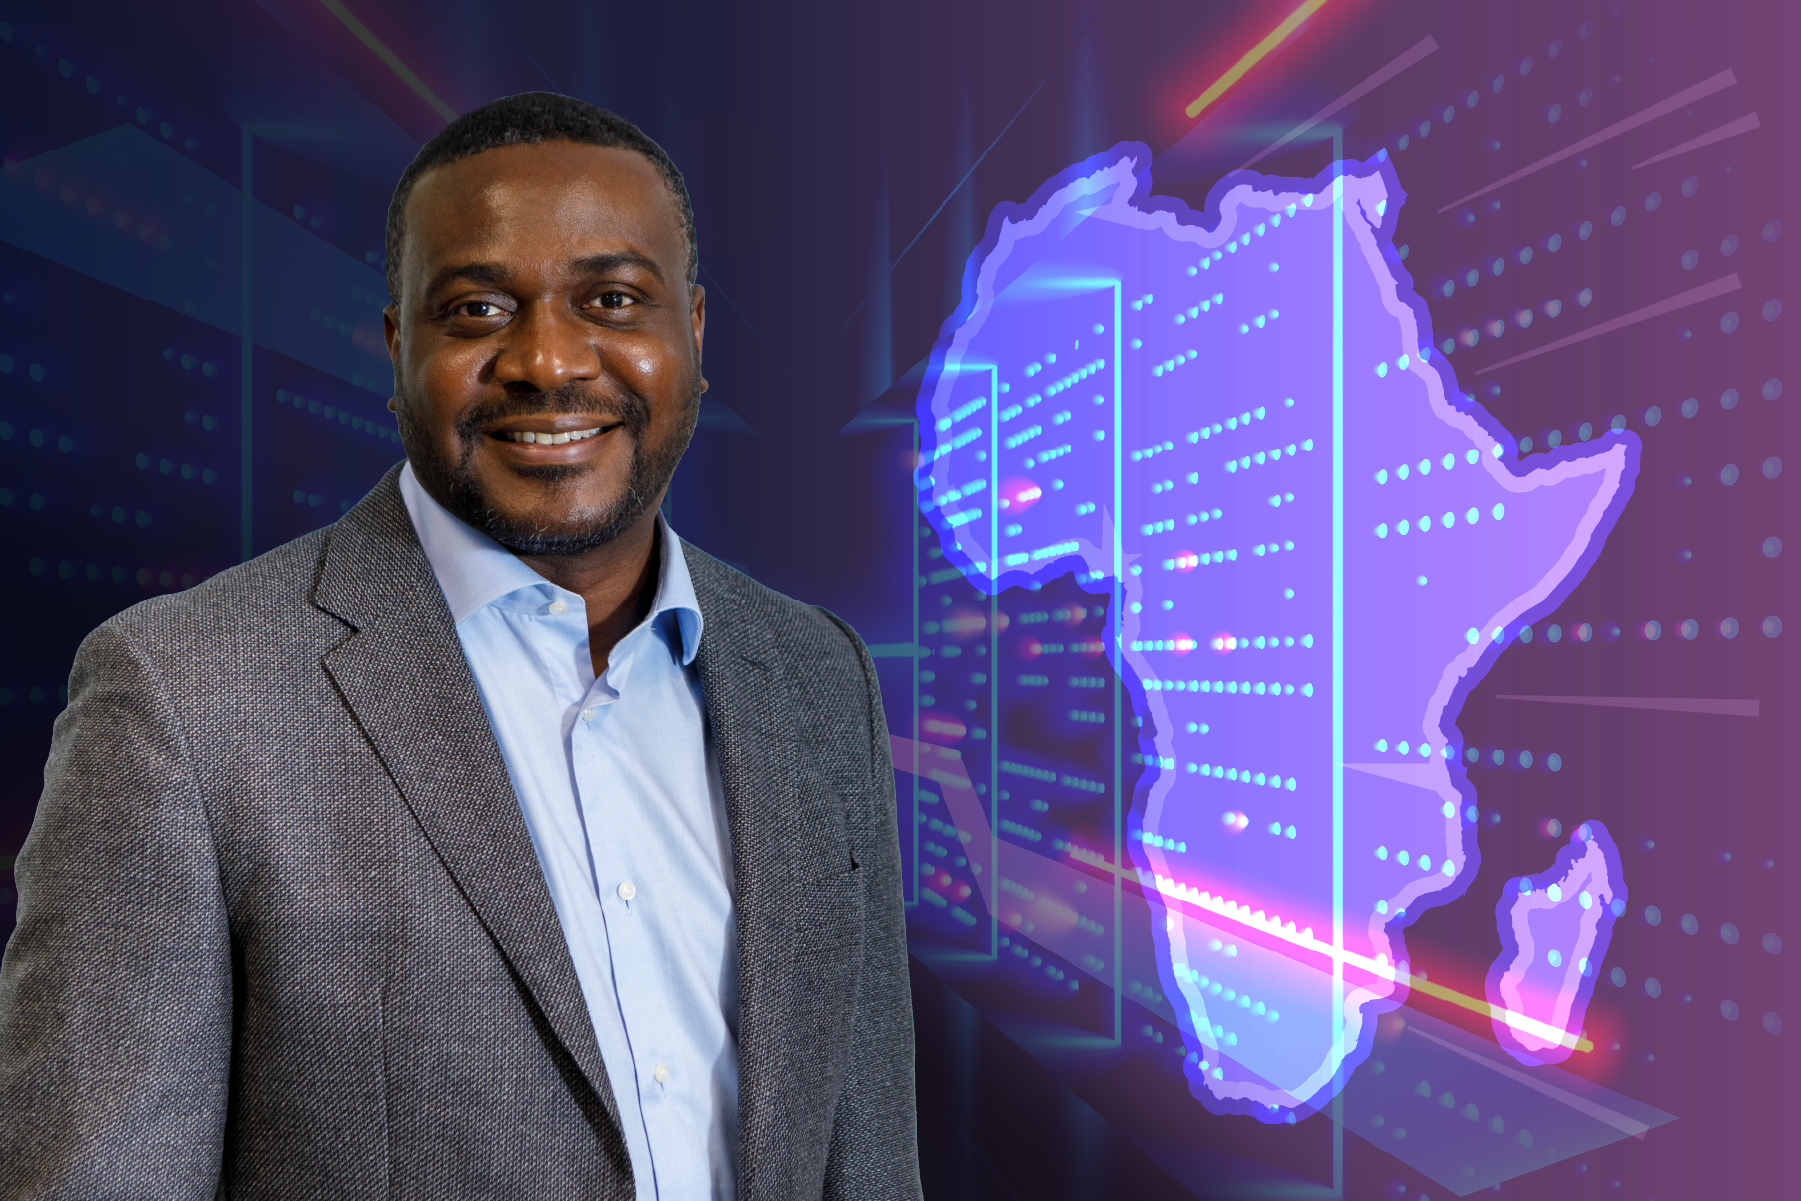 implementing digital systems in Africa